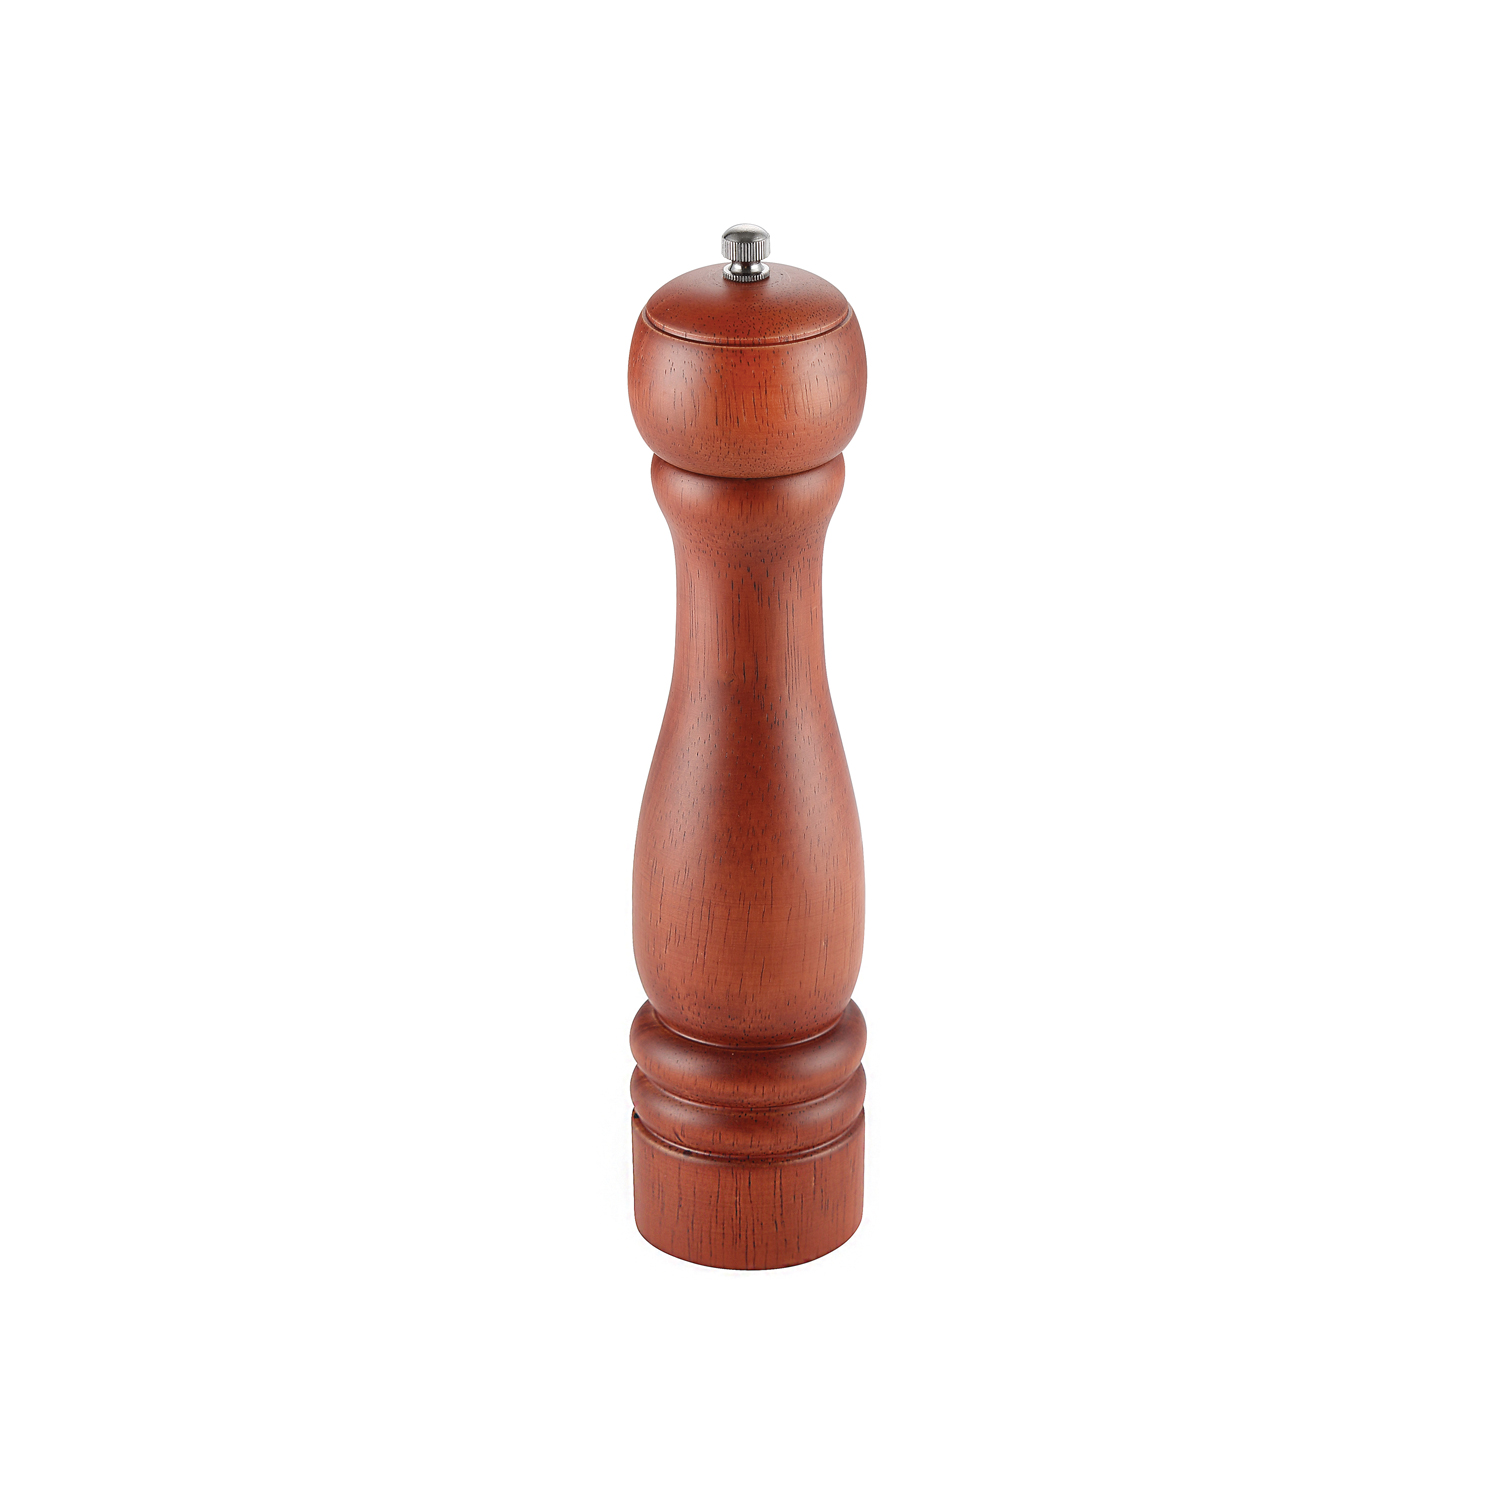 CAC China PMW1-10BN Pepper Mill Wooden Brown 10"H